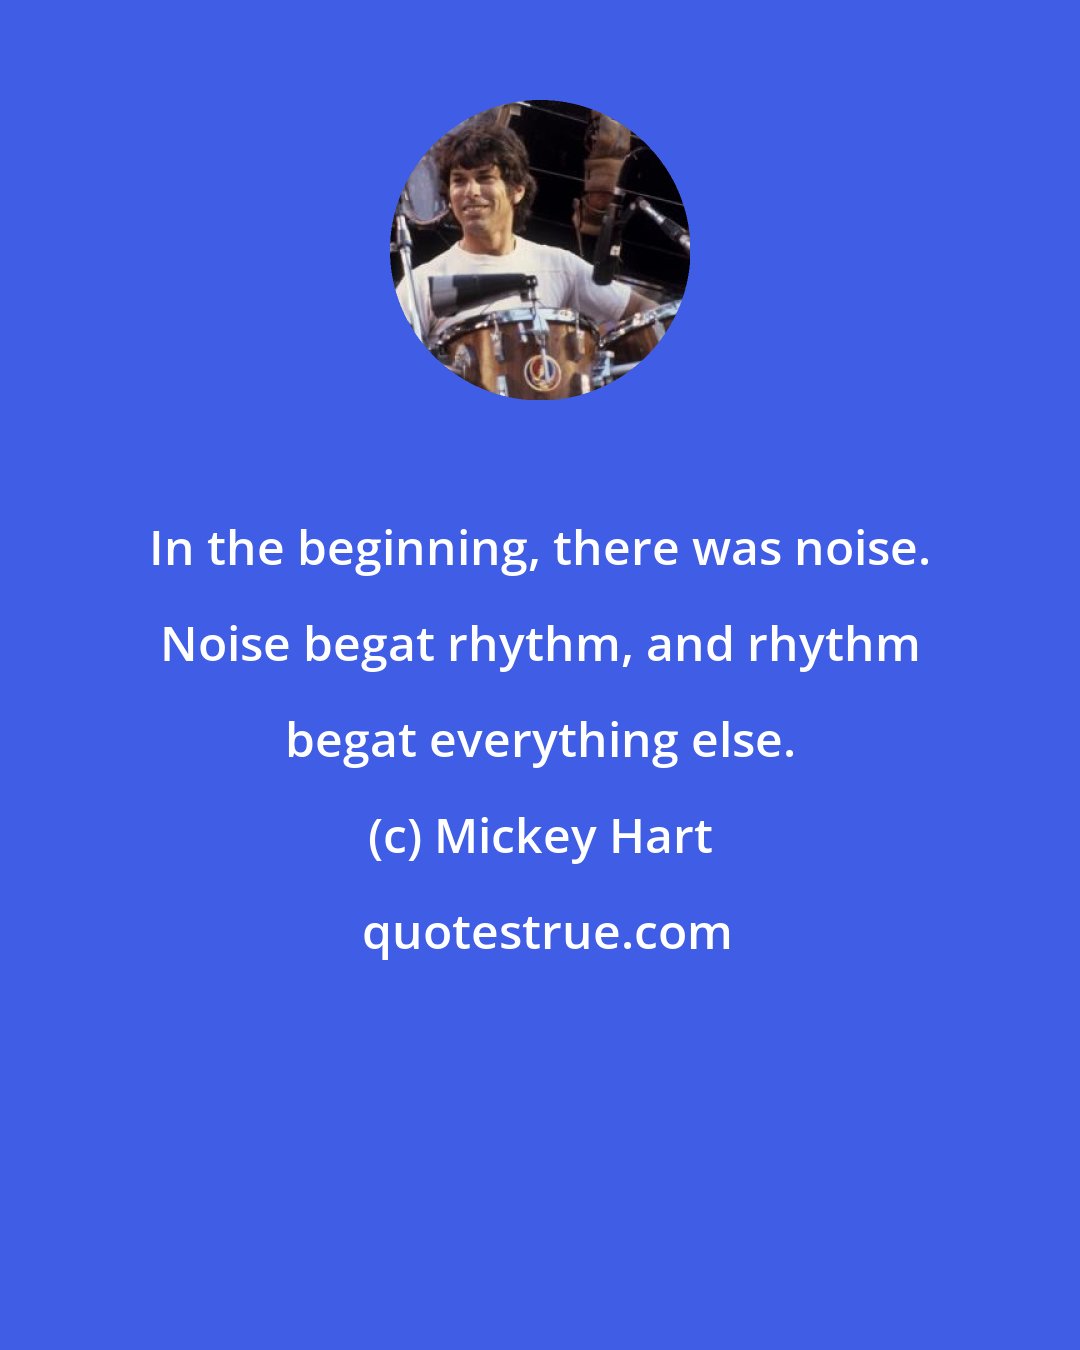 Mickey Hart: In the beginning, there was noise. Noise begat rhythm, and rhythm begat everything else.